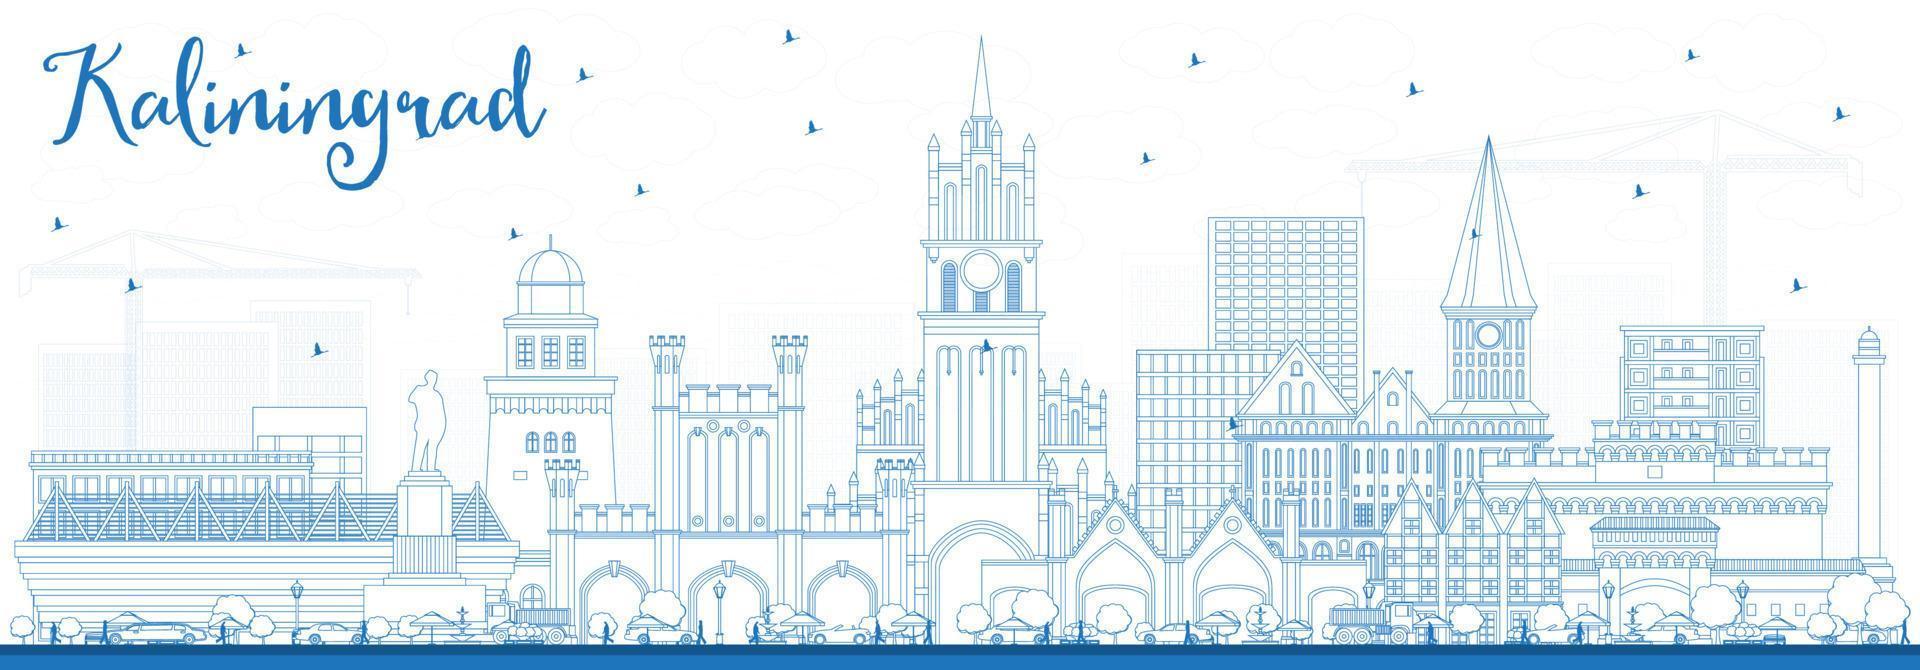 Outline Kaliningrad Russia City Skyline with Blue Buildings. vector